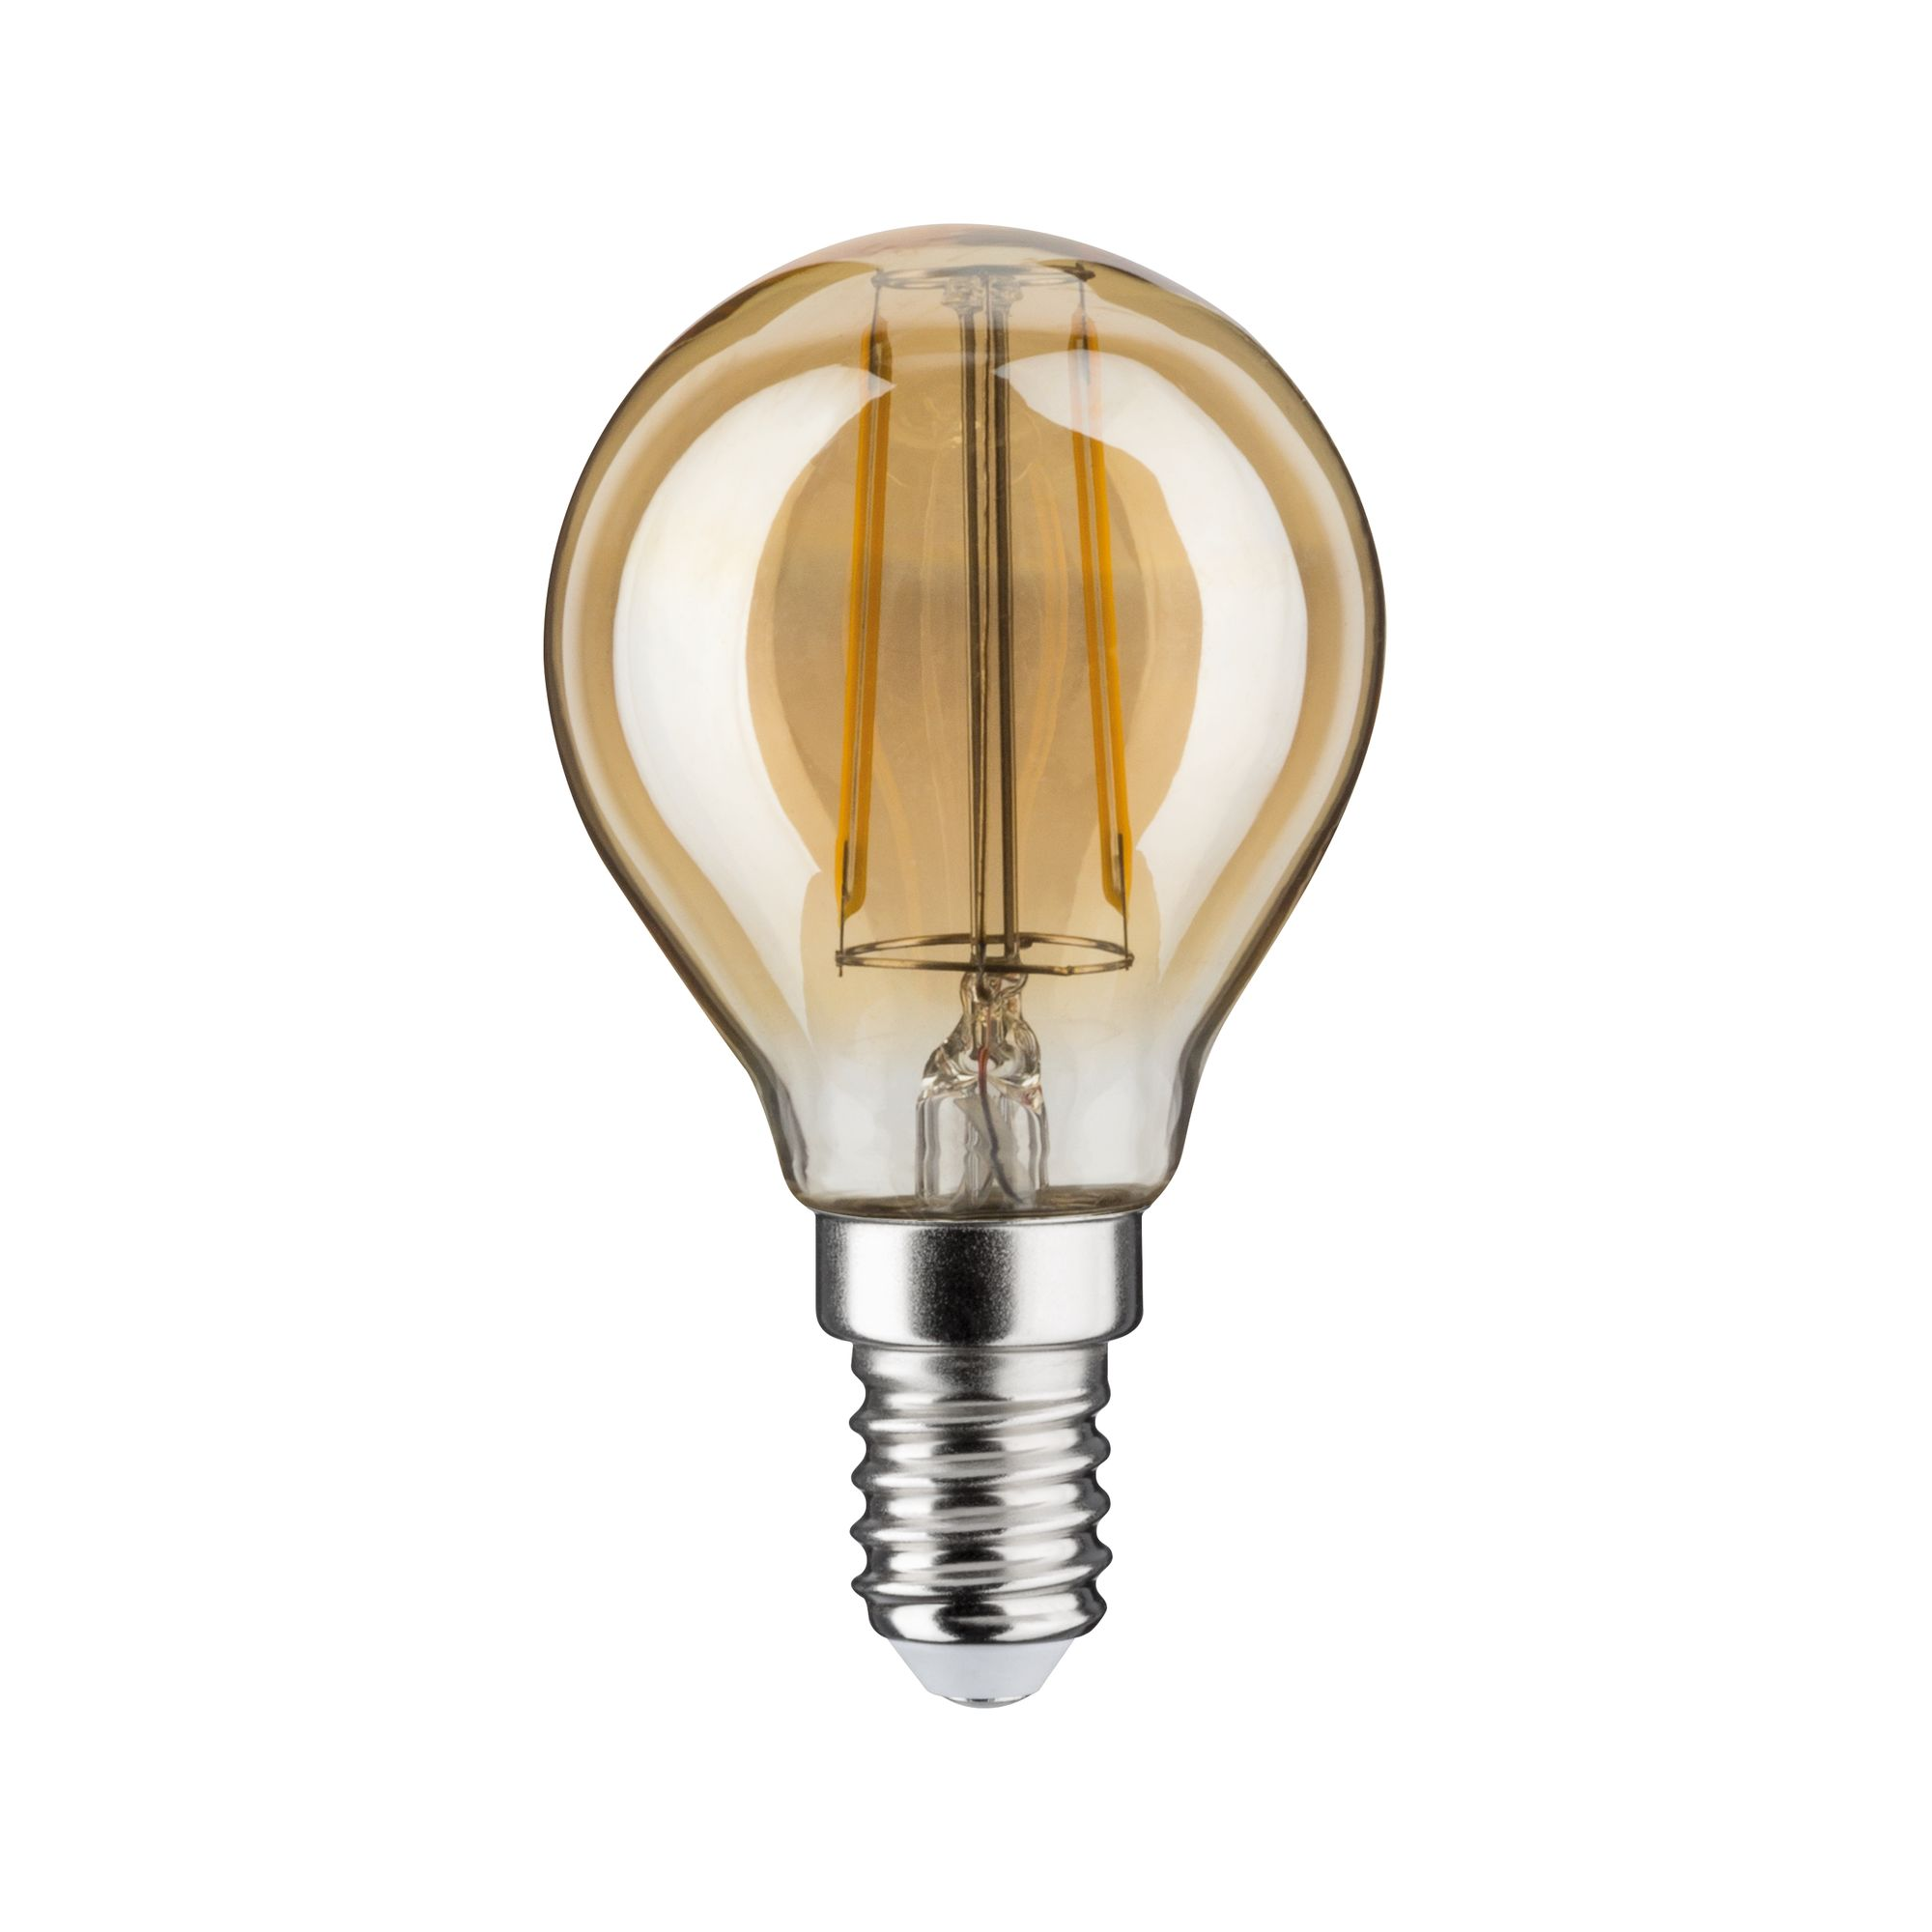 LED-Tropfenlampe E14 2,6W (26W) 260 lm warmgold + product picture